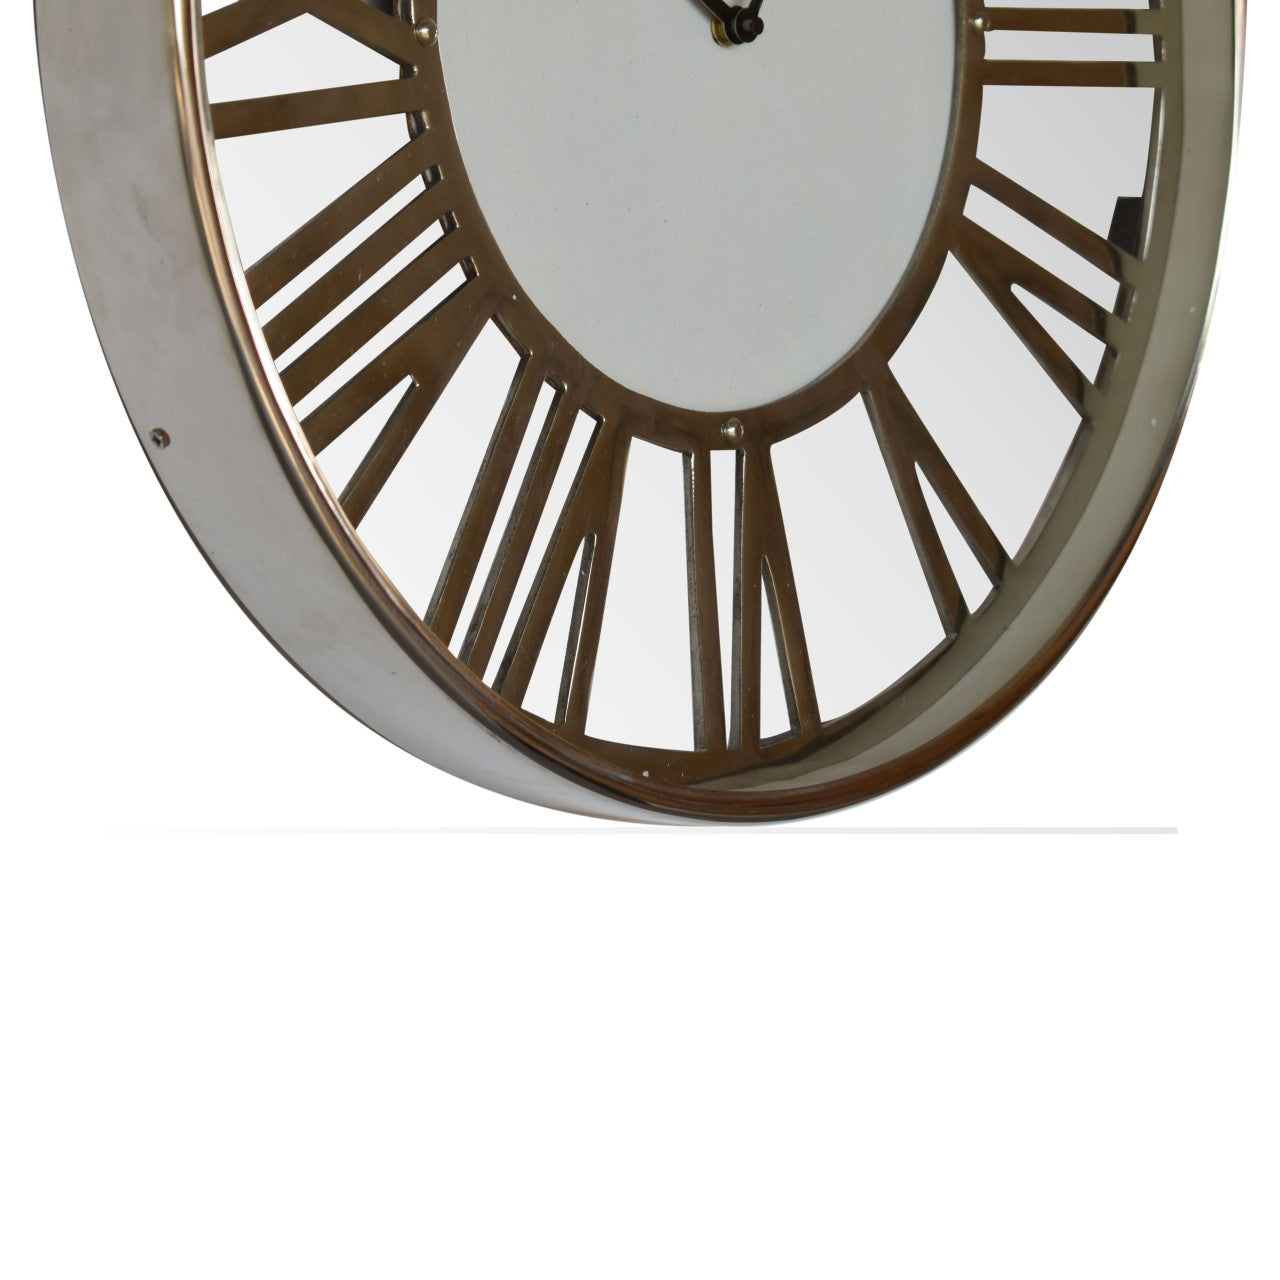 White and Chrome Wall Clock - CasaFenix